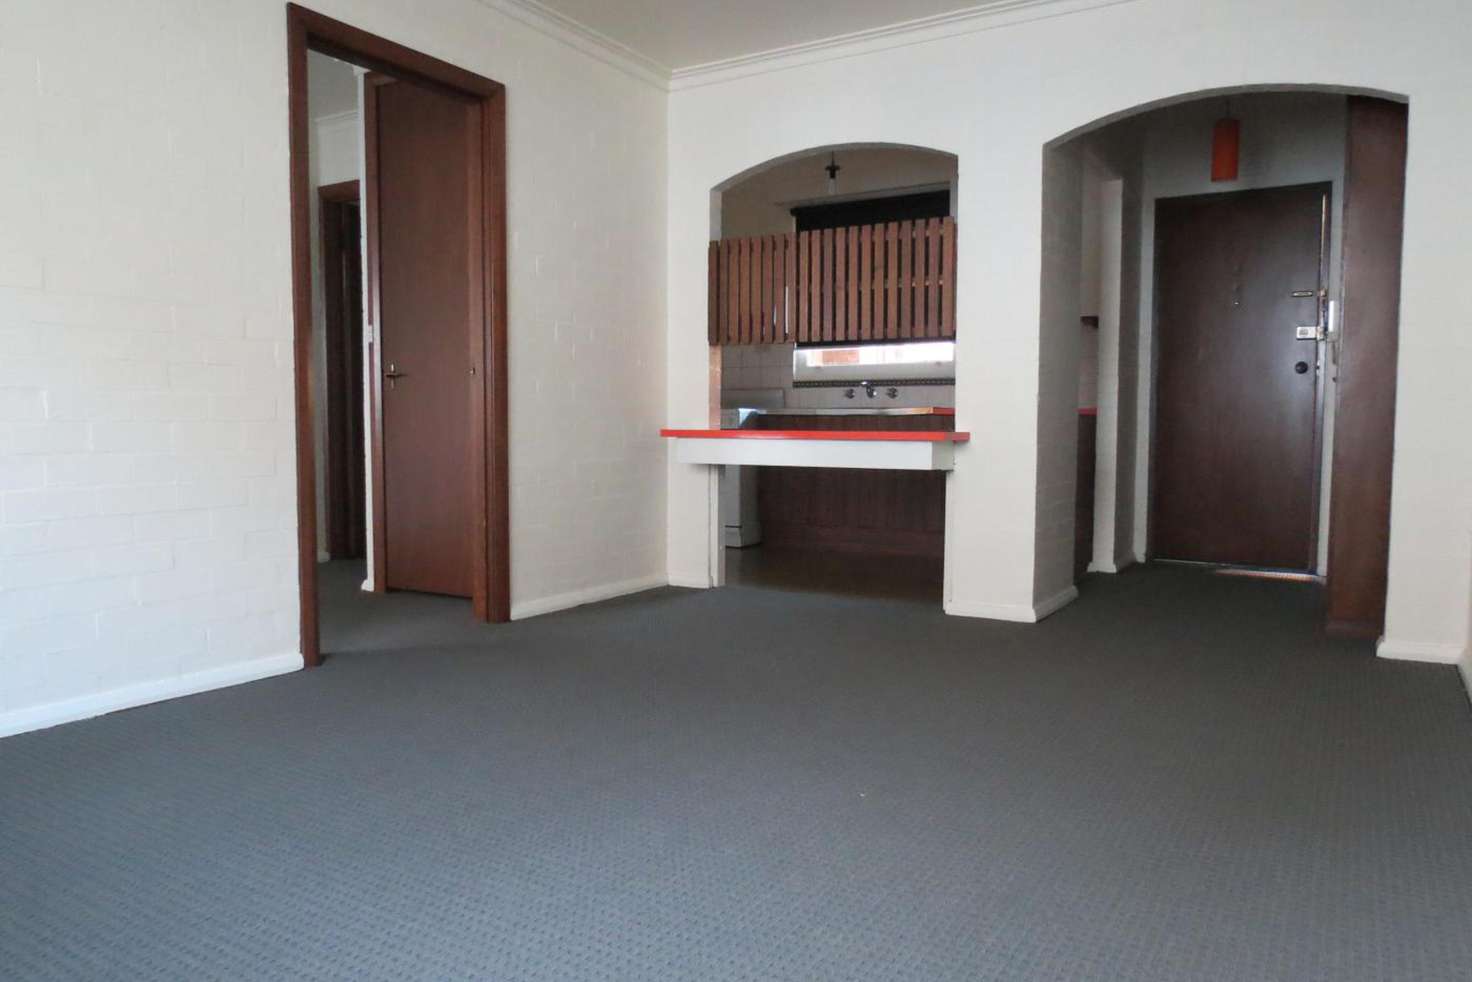 Main view of Homely apartment listing, 10/59 Station Street, Fairfield VIC 3078